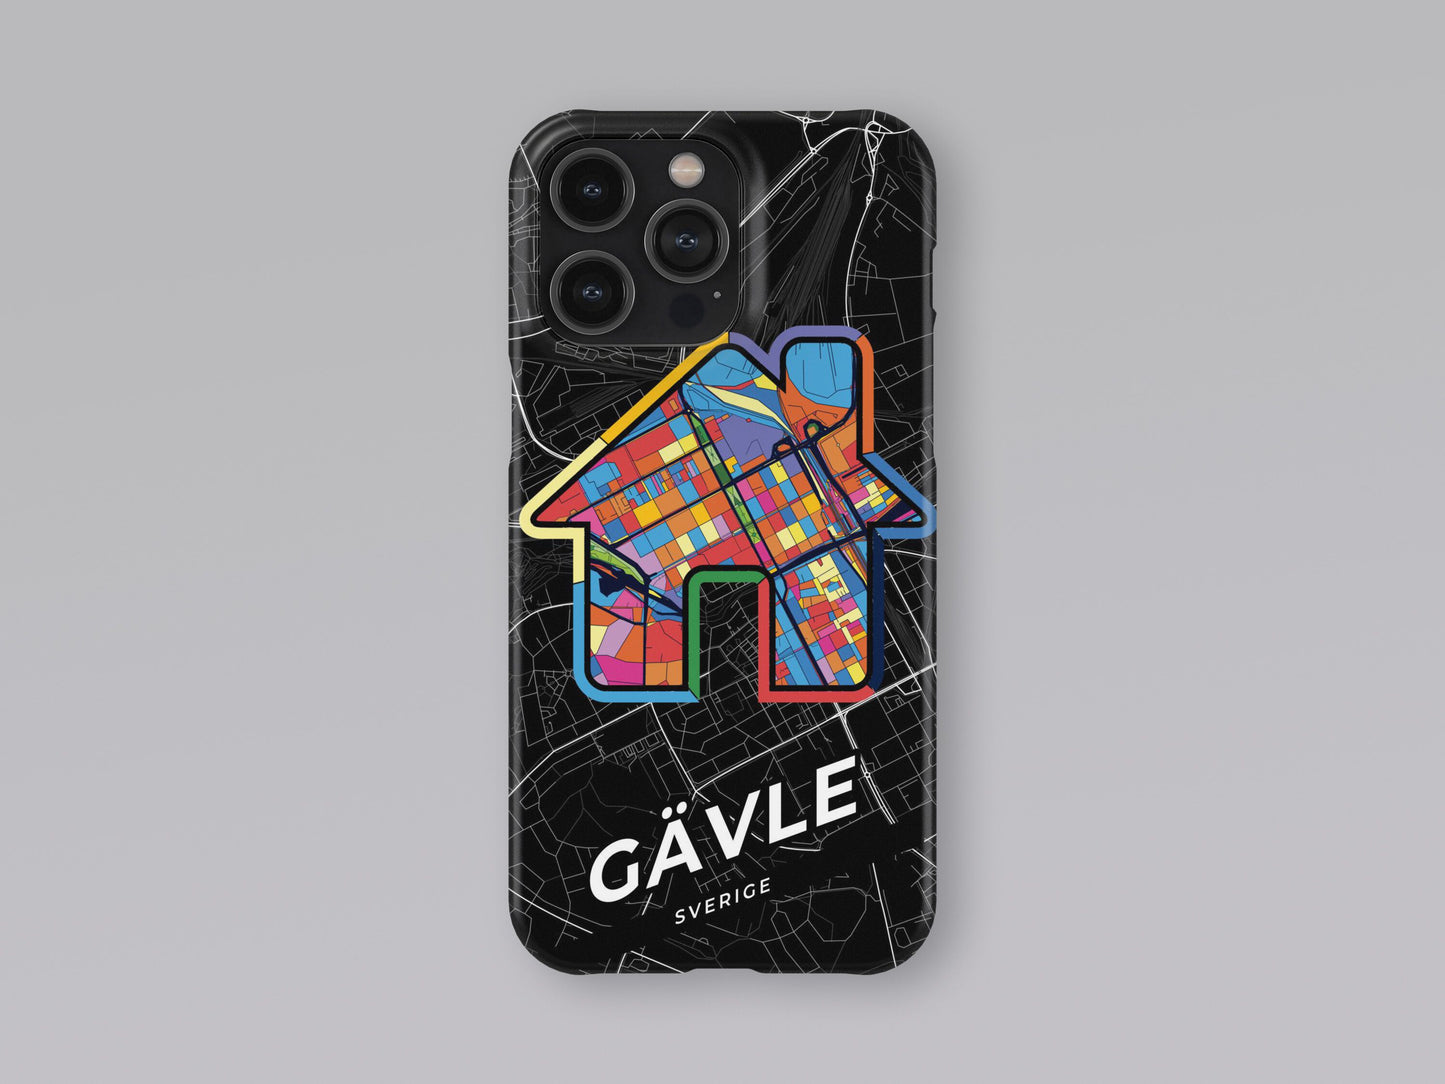 Gävle Sweden slim phone case with colorful icon. Birthday, wedding or housewarming gift. Couple match cases. 3